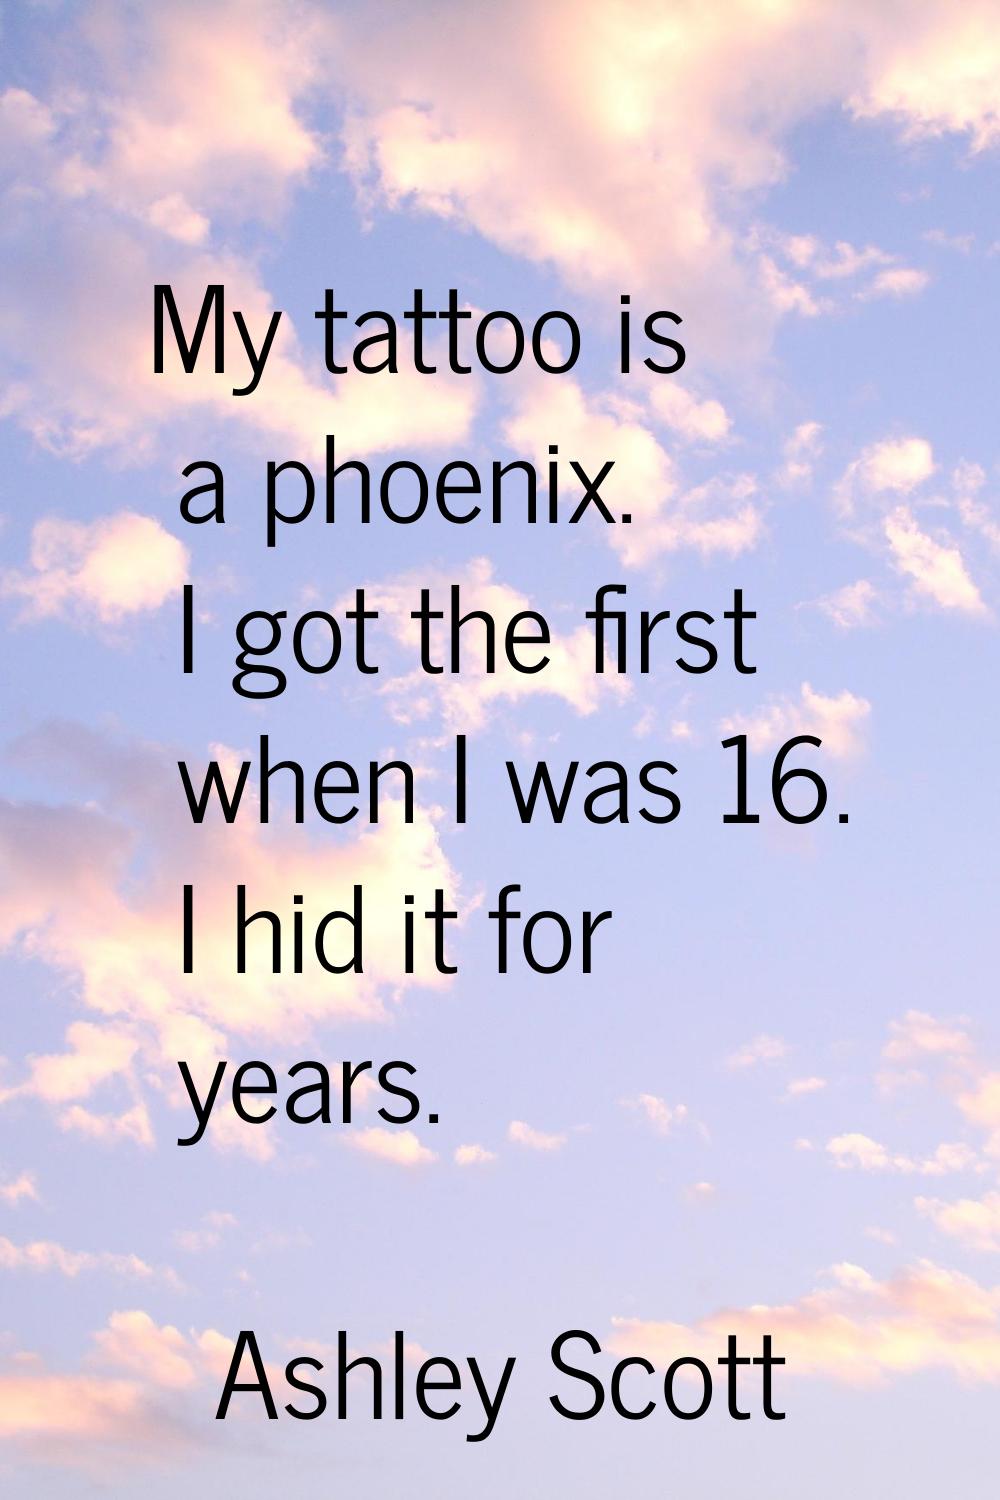 My tattoo is a phoenix. I got the first when I was 16. I hid it for years.